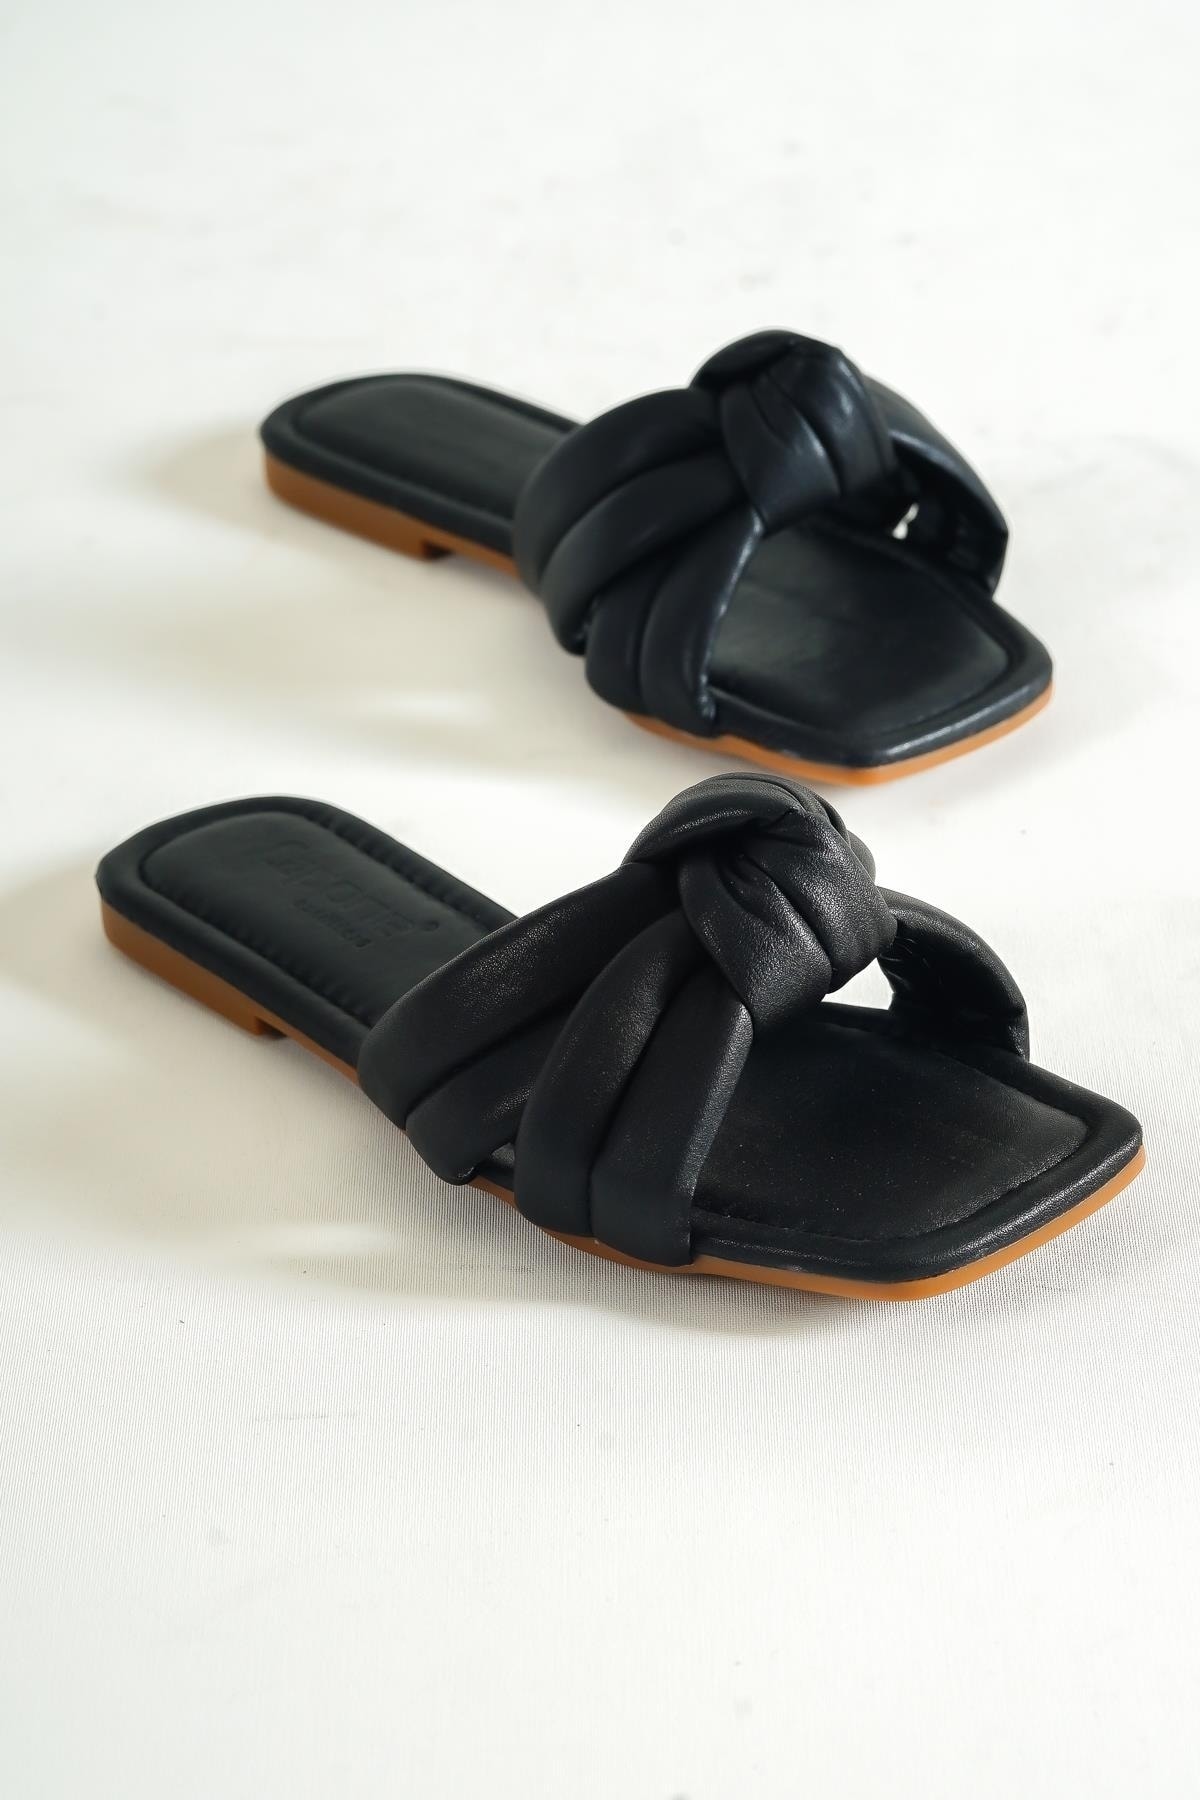 Capone Outfitters Capone Flat Heeled Women's Black Slippers